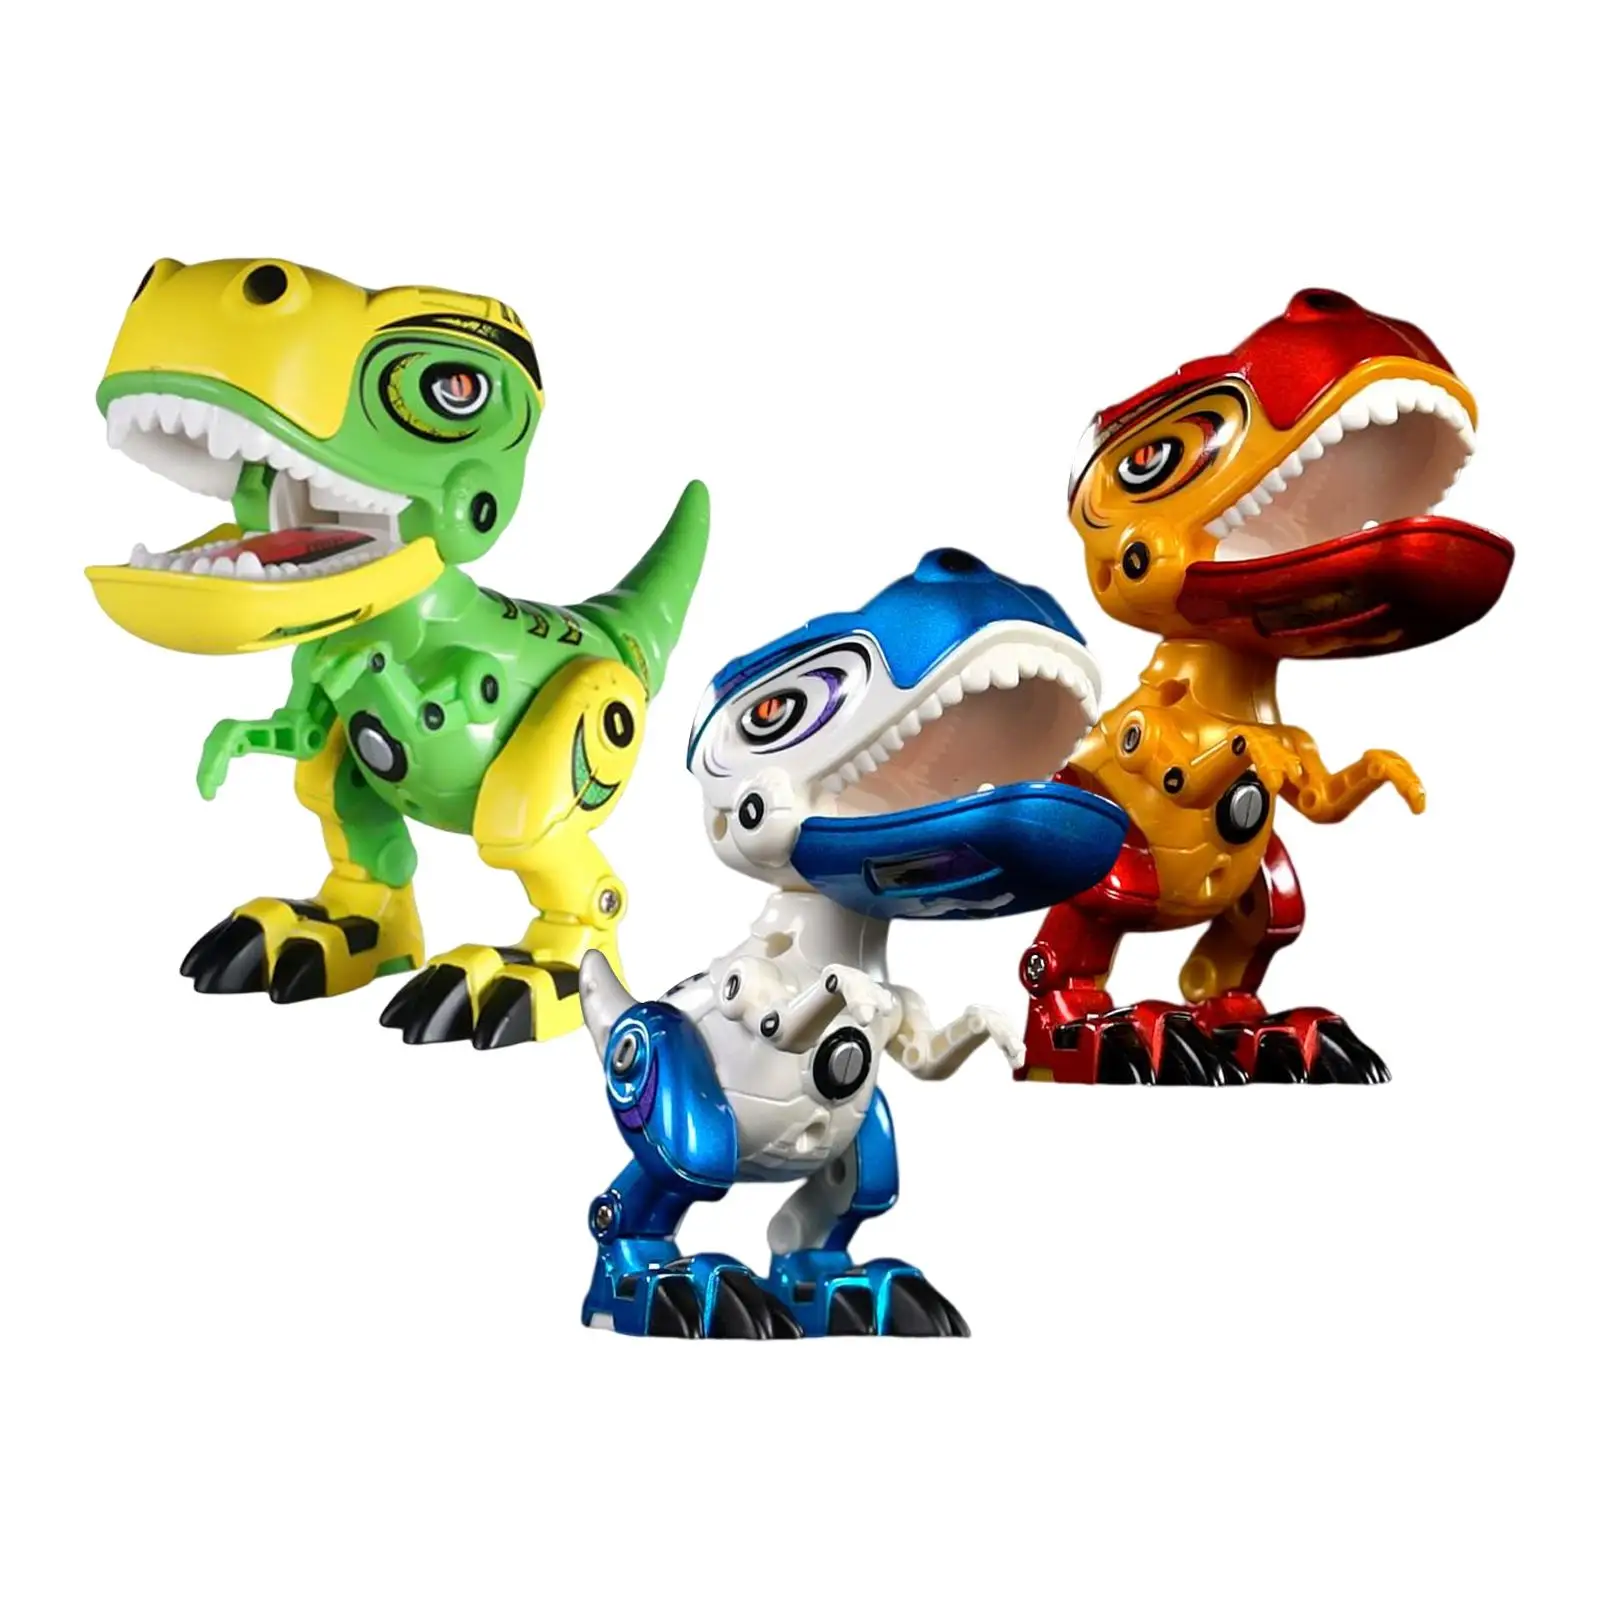 Electric Dinosaur Toy with Sound and Light Dinosaur Action Toy Early Learning Education Toy for Gifts